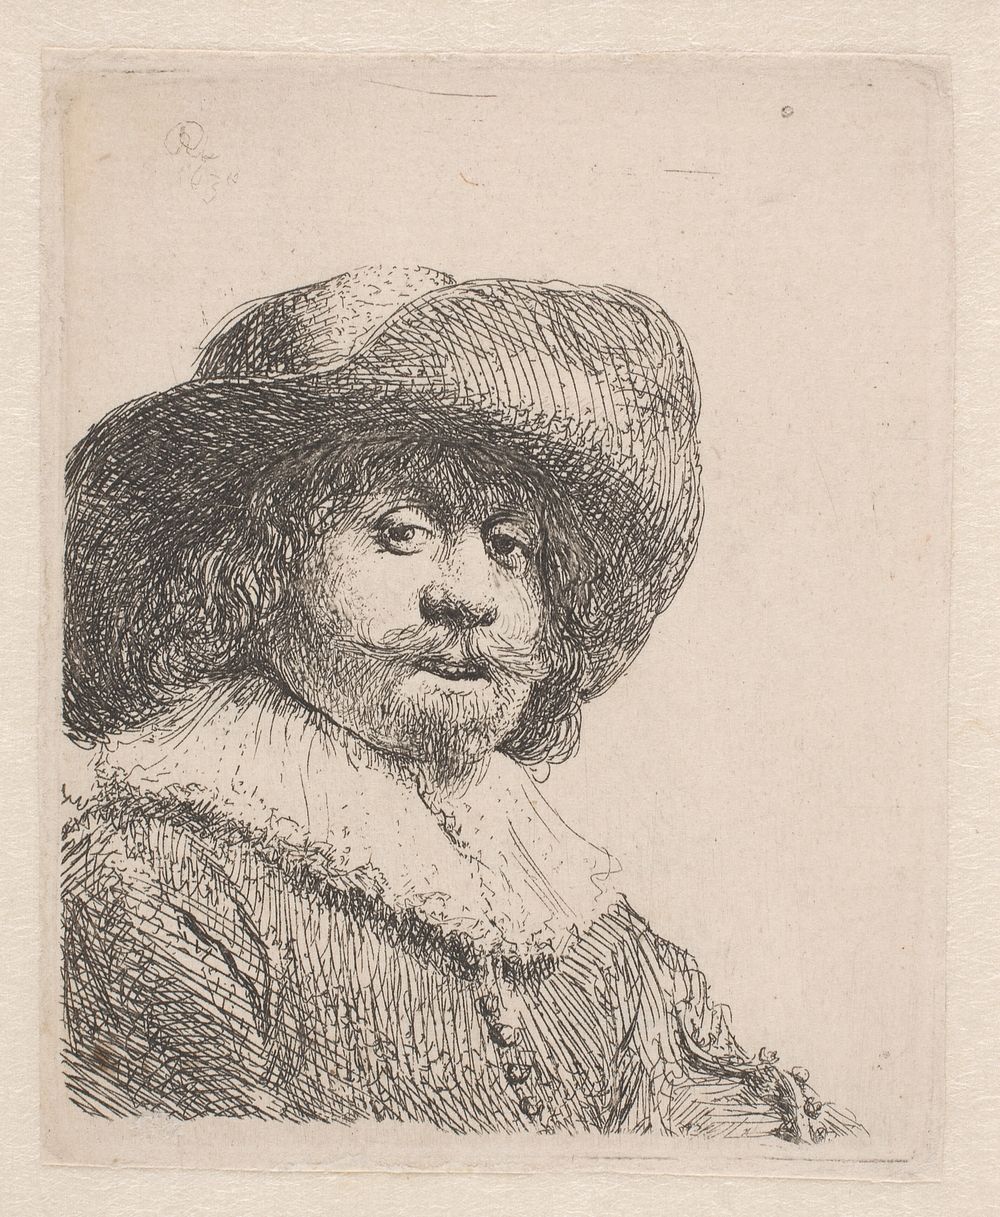 Portrait of a man with a broad-brimmed hat by Rembrandt van Rijn